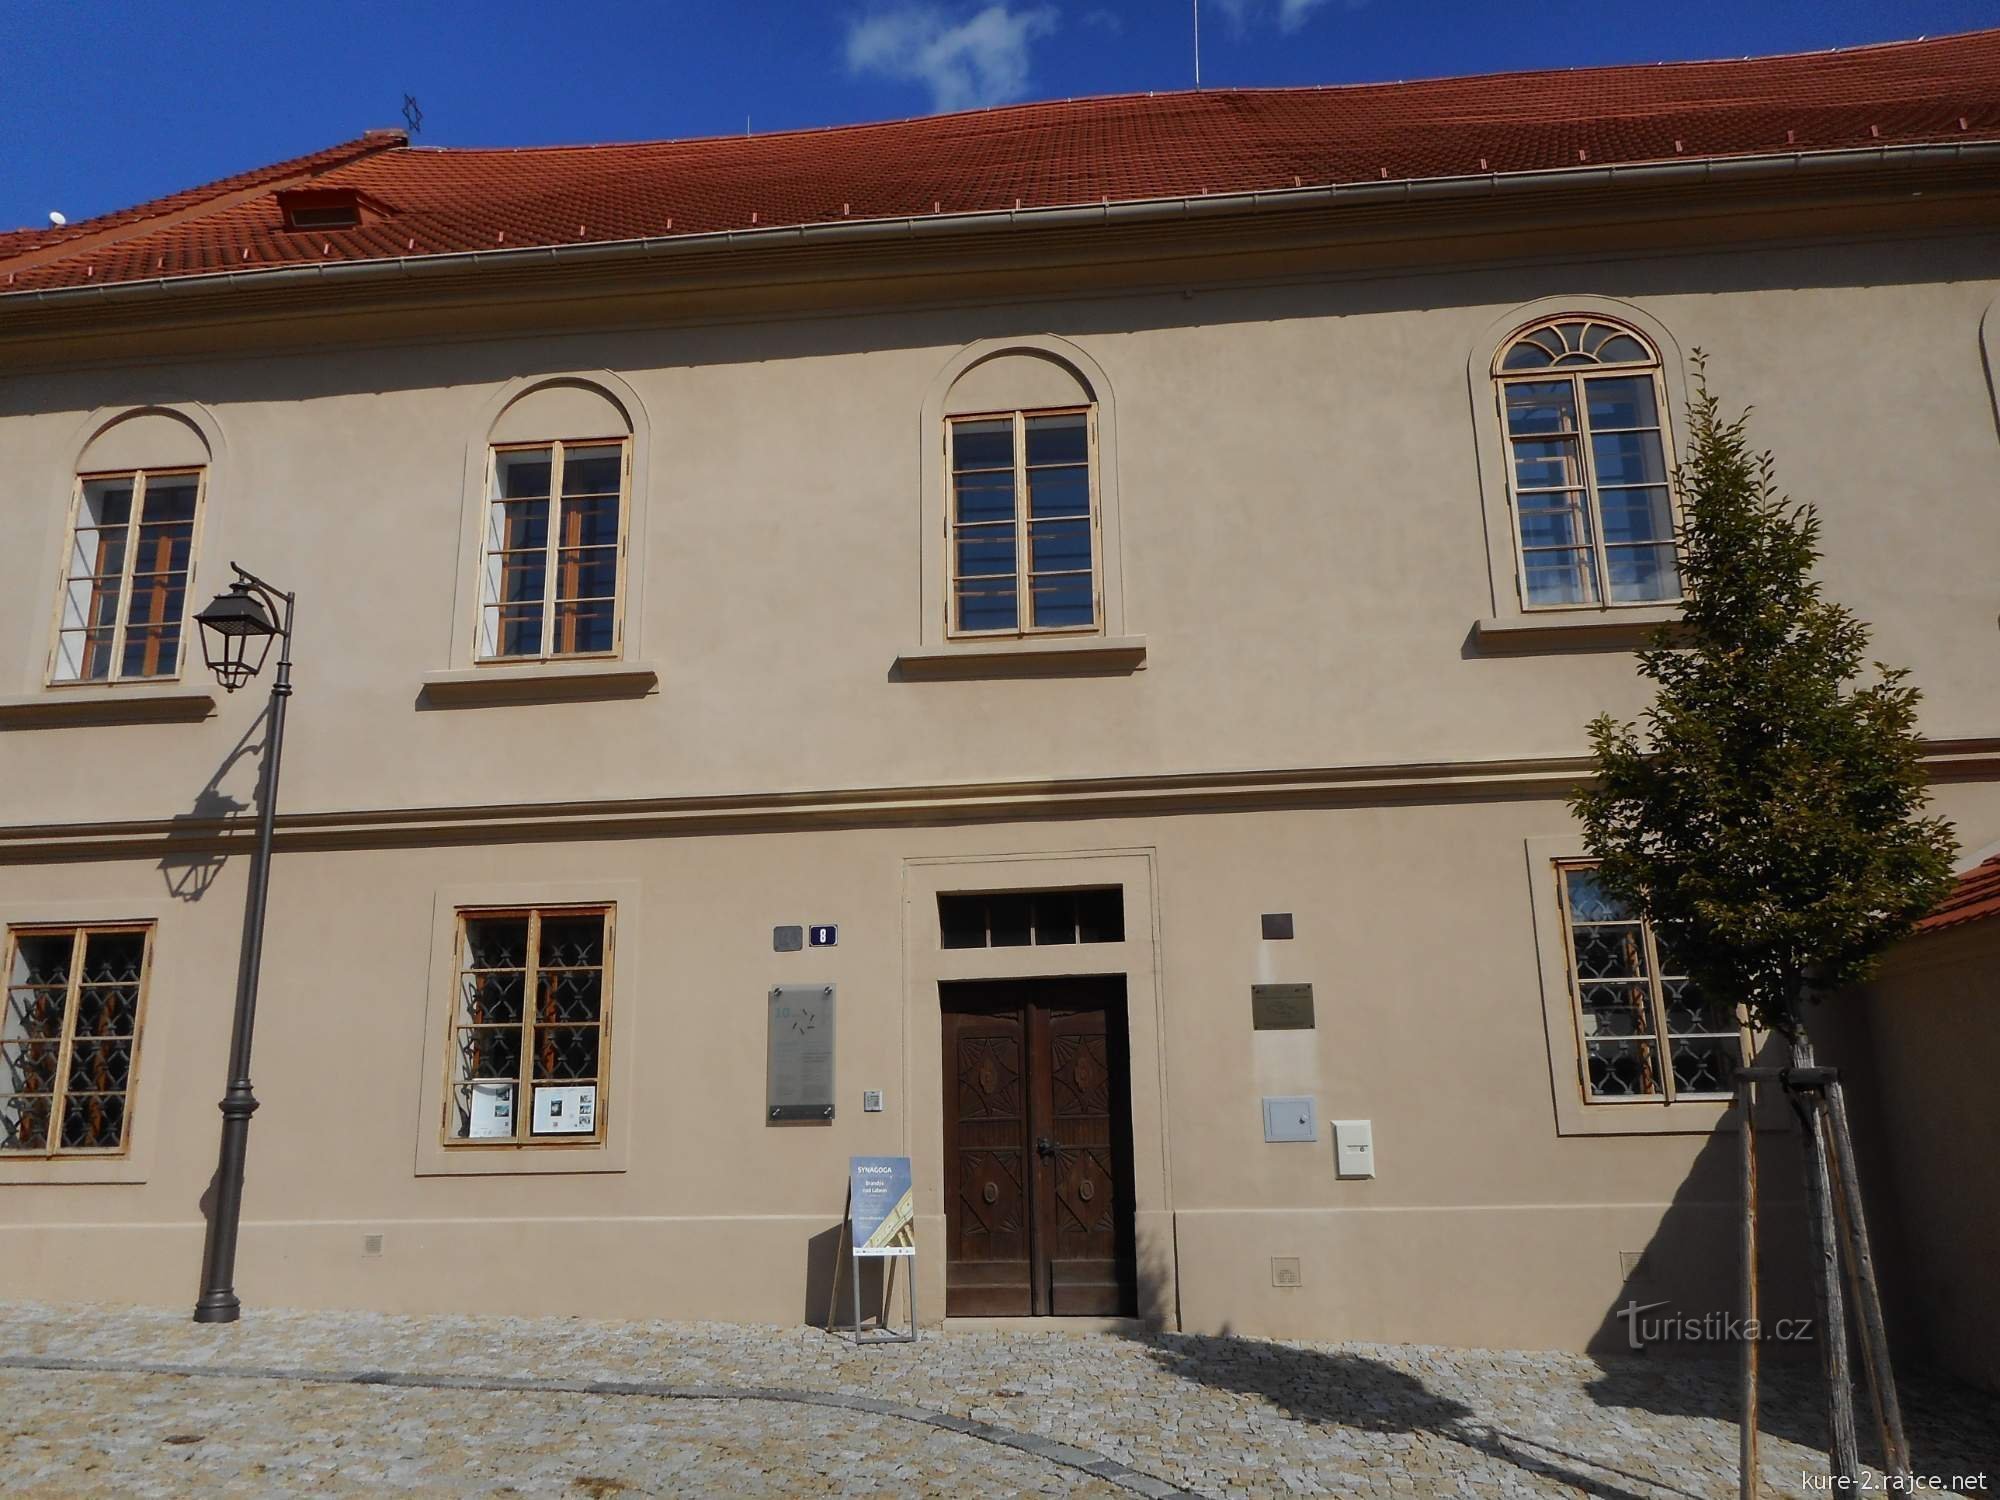 Today, the synagogue serves as a Jewish museum